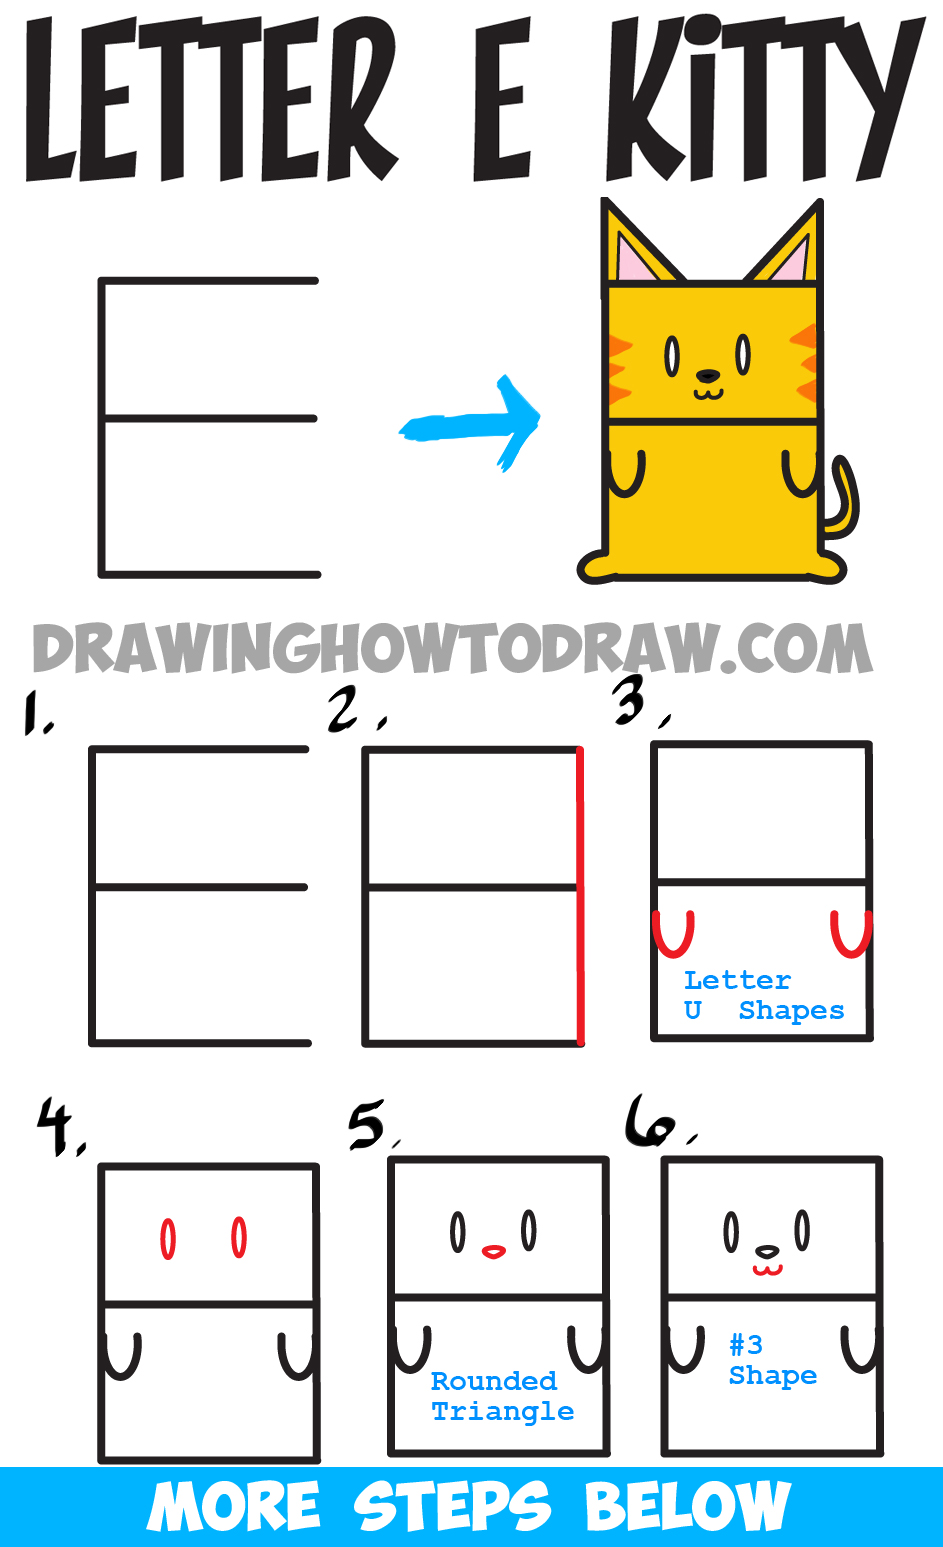 Learn How to Draw a Cartoon Kitty Cat from Uppercase Letter E : Step by Step Drawing Lesson for Kids